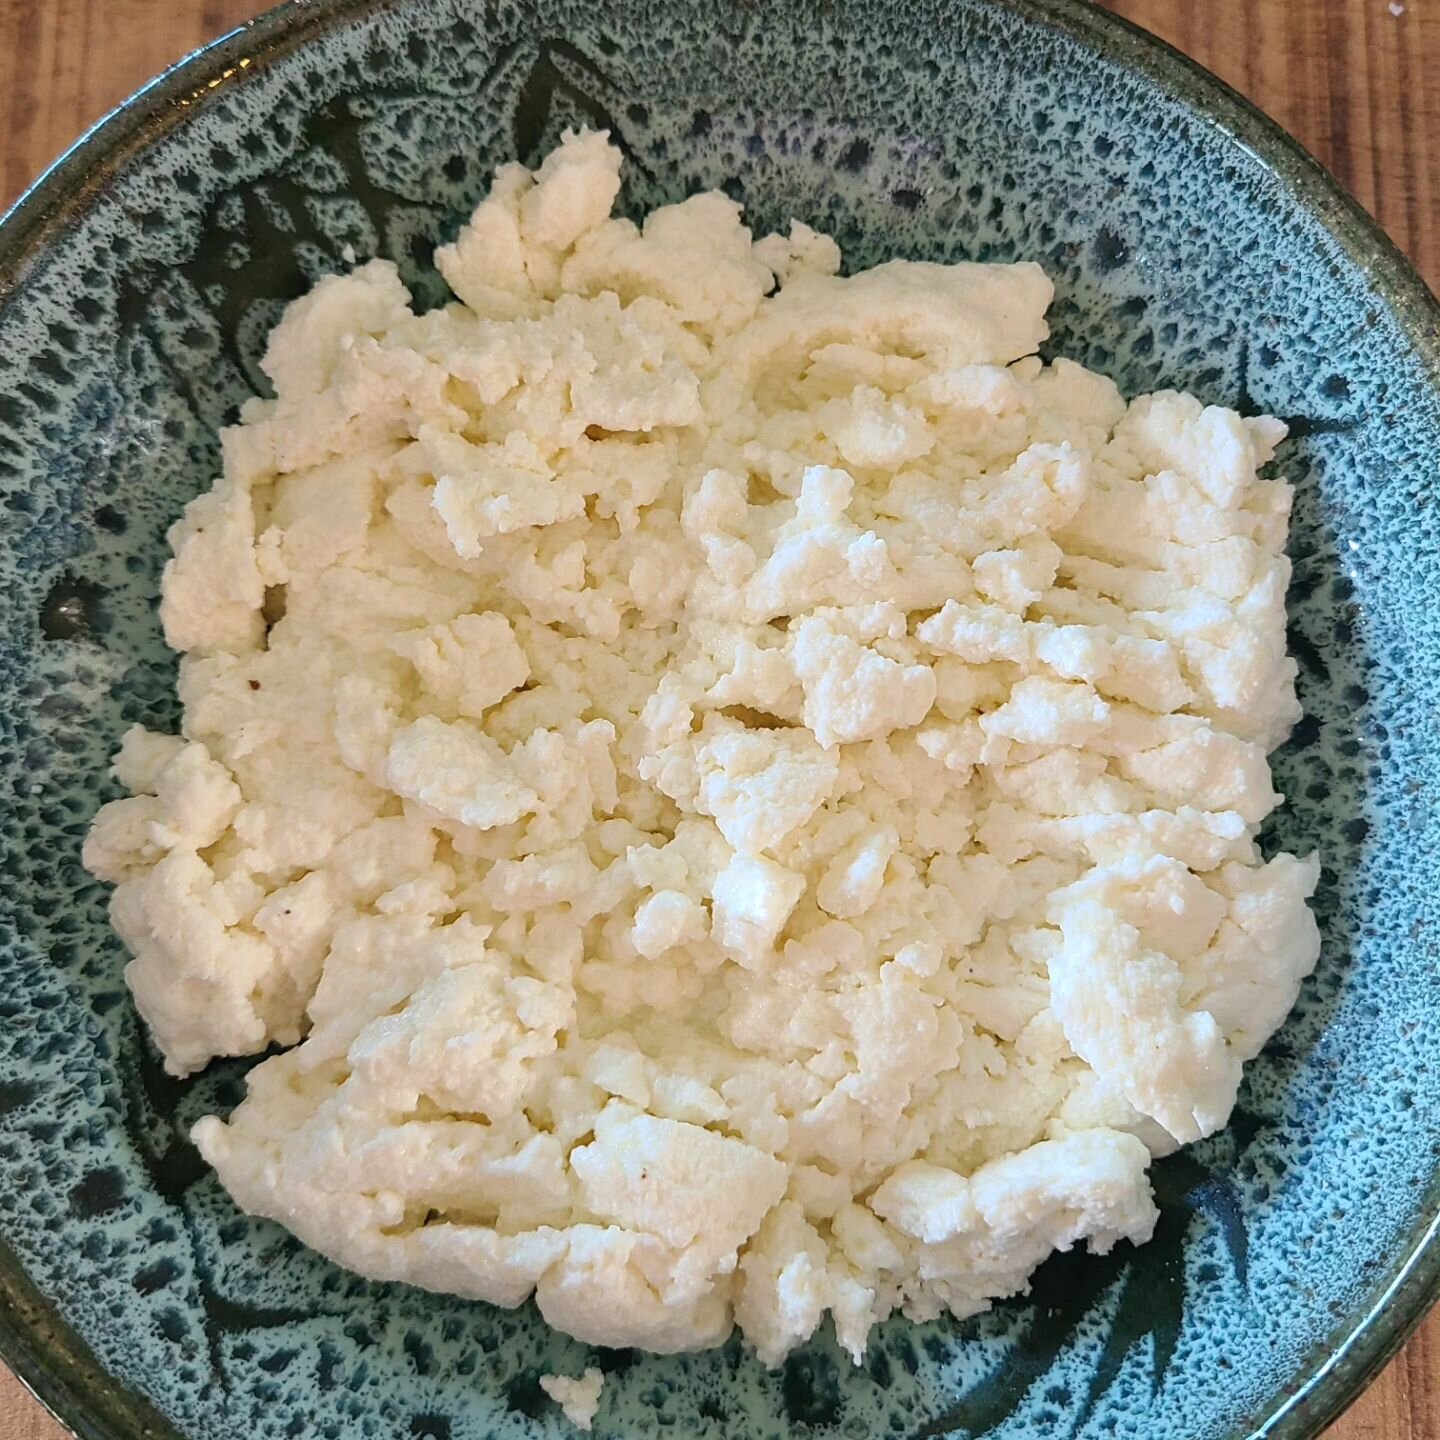 There's something truly magical about making fresh cheese. To do this at home can be a bit difficult, though, since most of us don't have rennet, leftover whey, or special cheese molds on hand. This fresh, &quot;ricotta-adjacent&quot; cheese is a gre